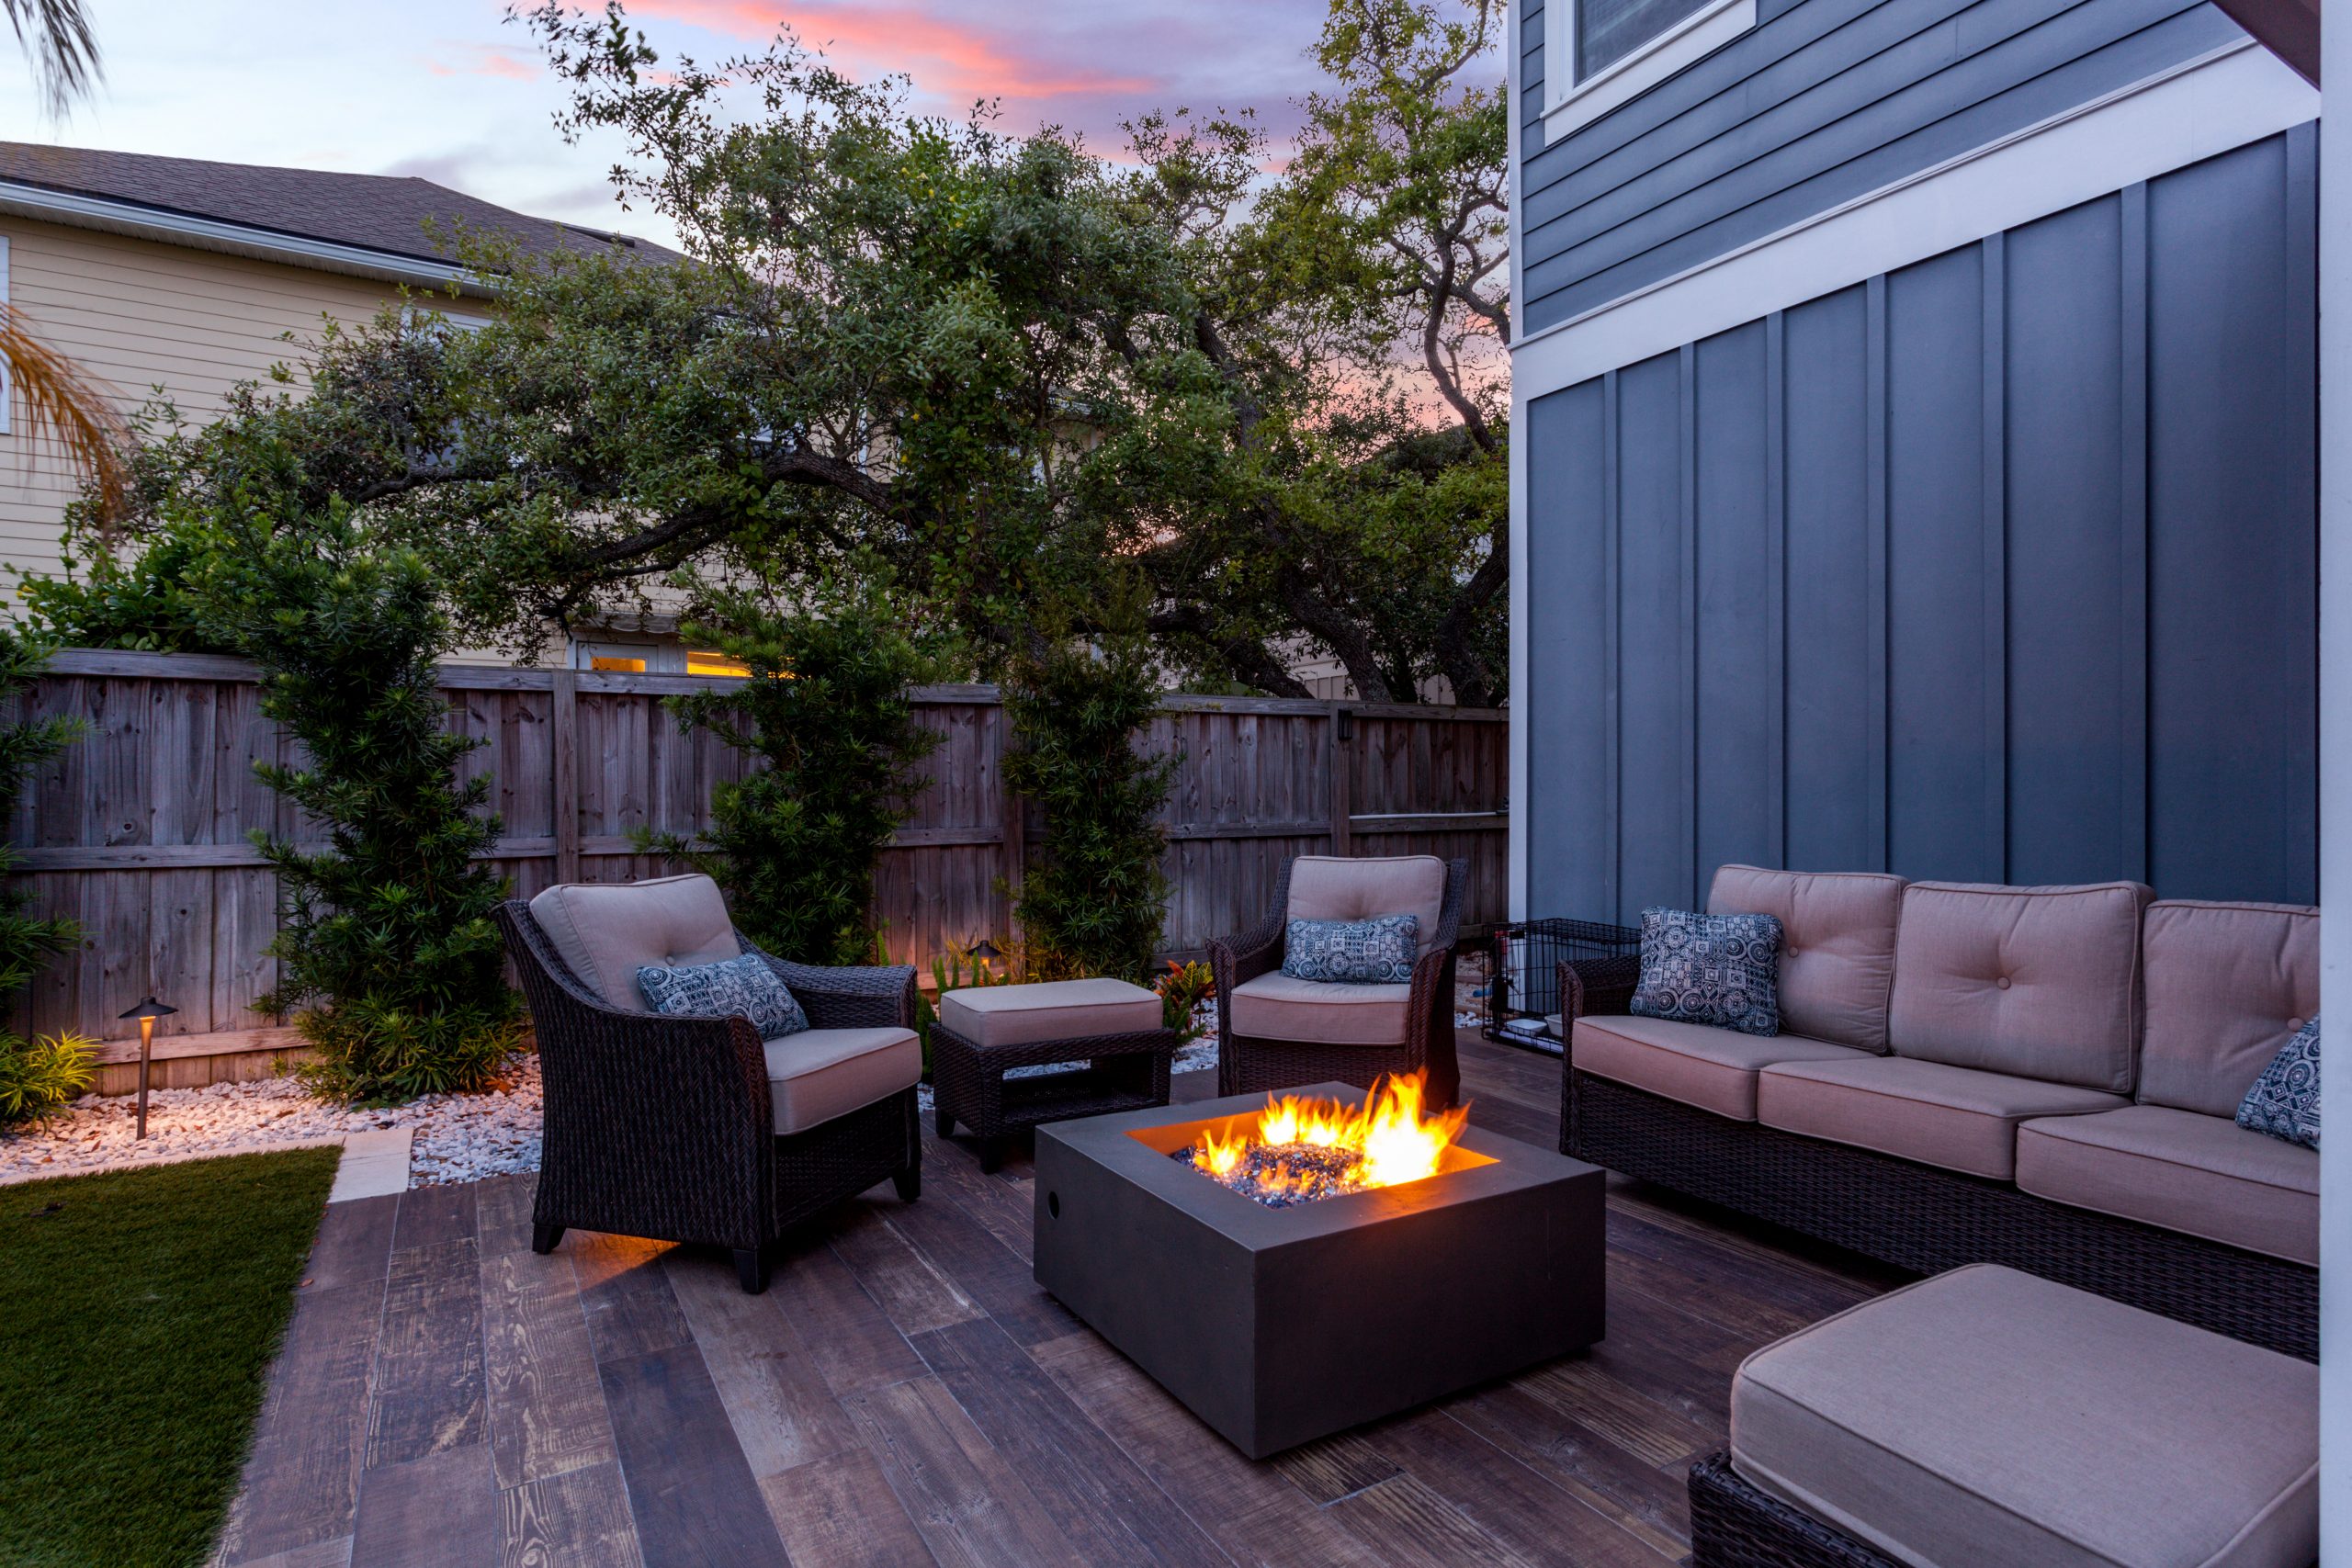 , Small backyard ideas to make your outdoor space look bigger and better